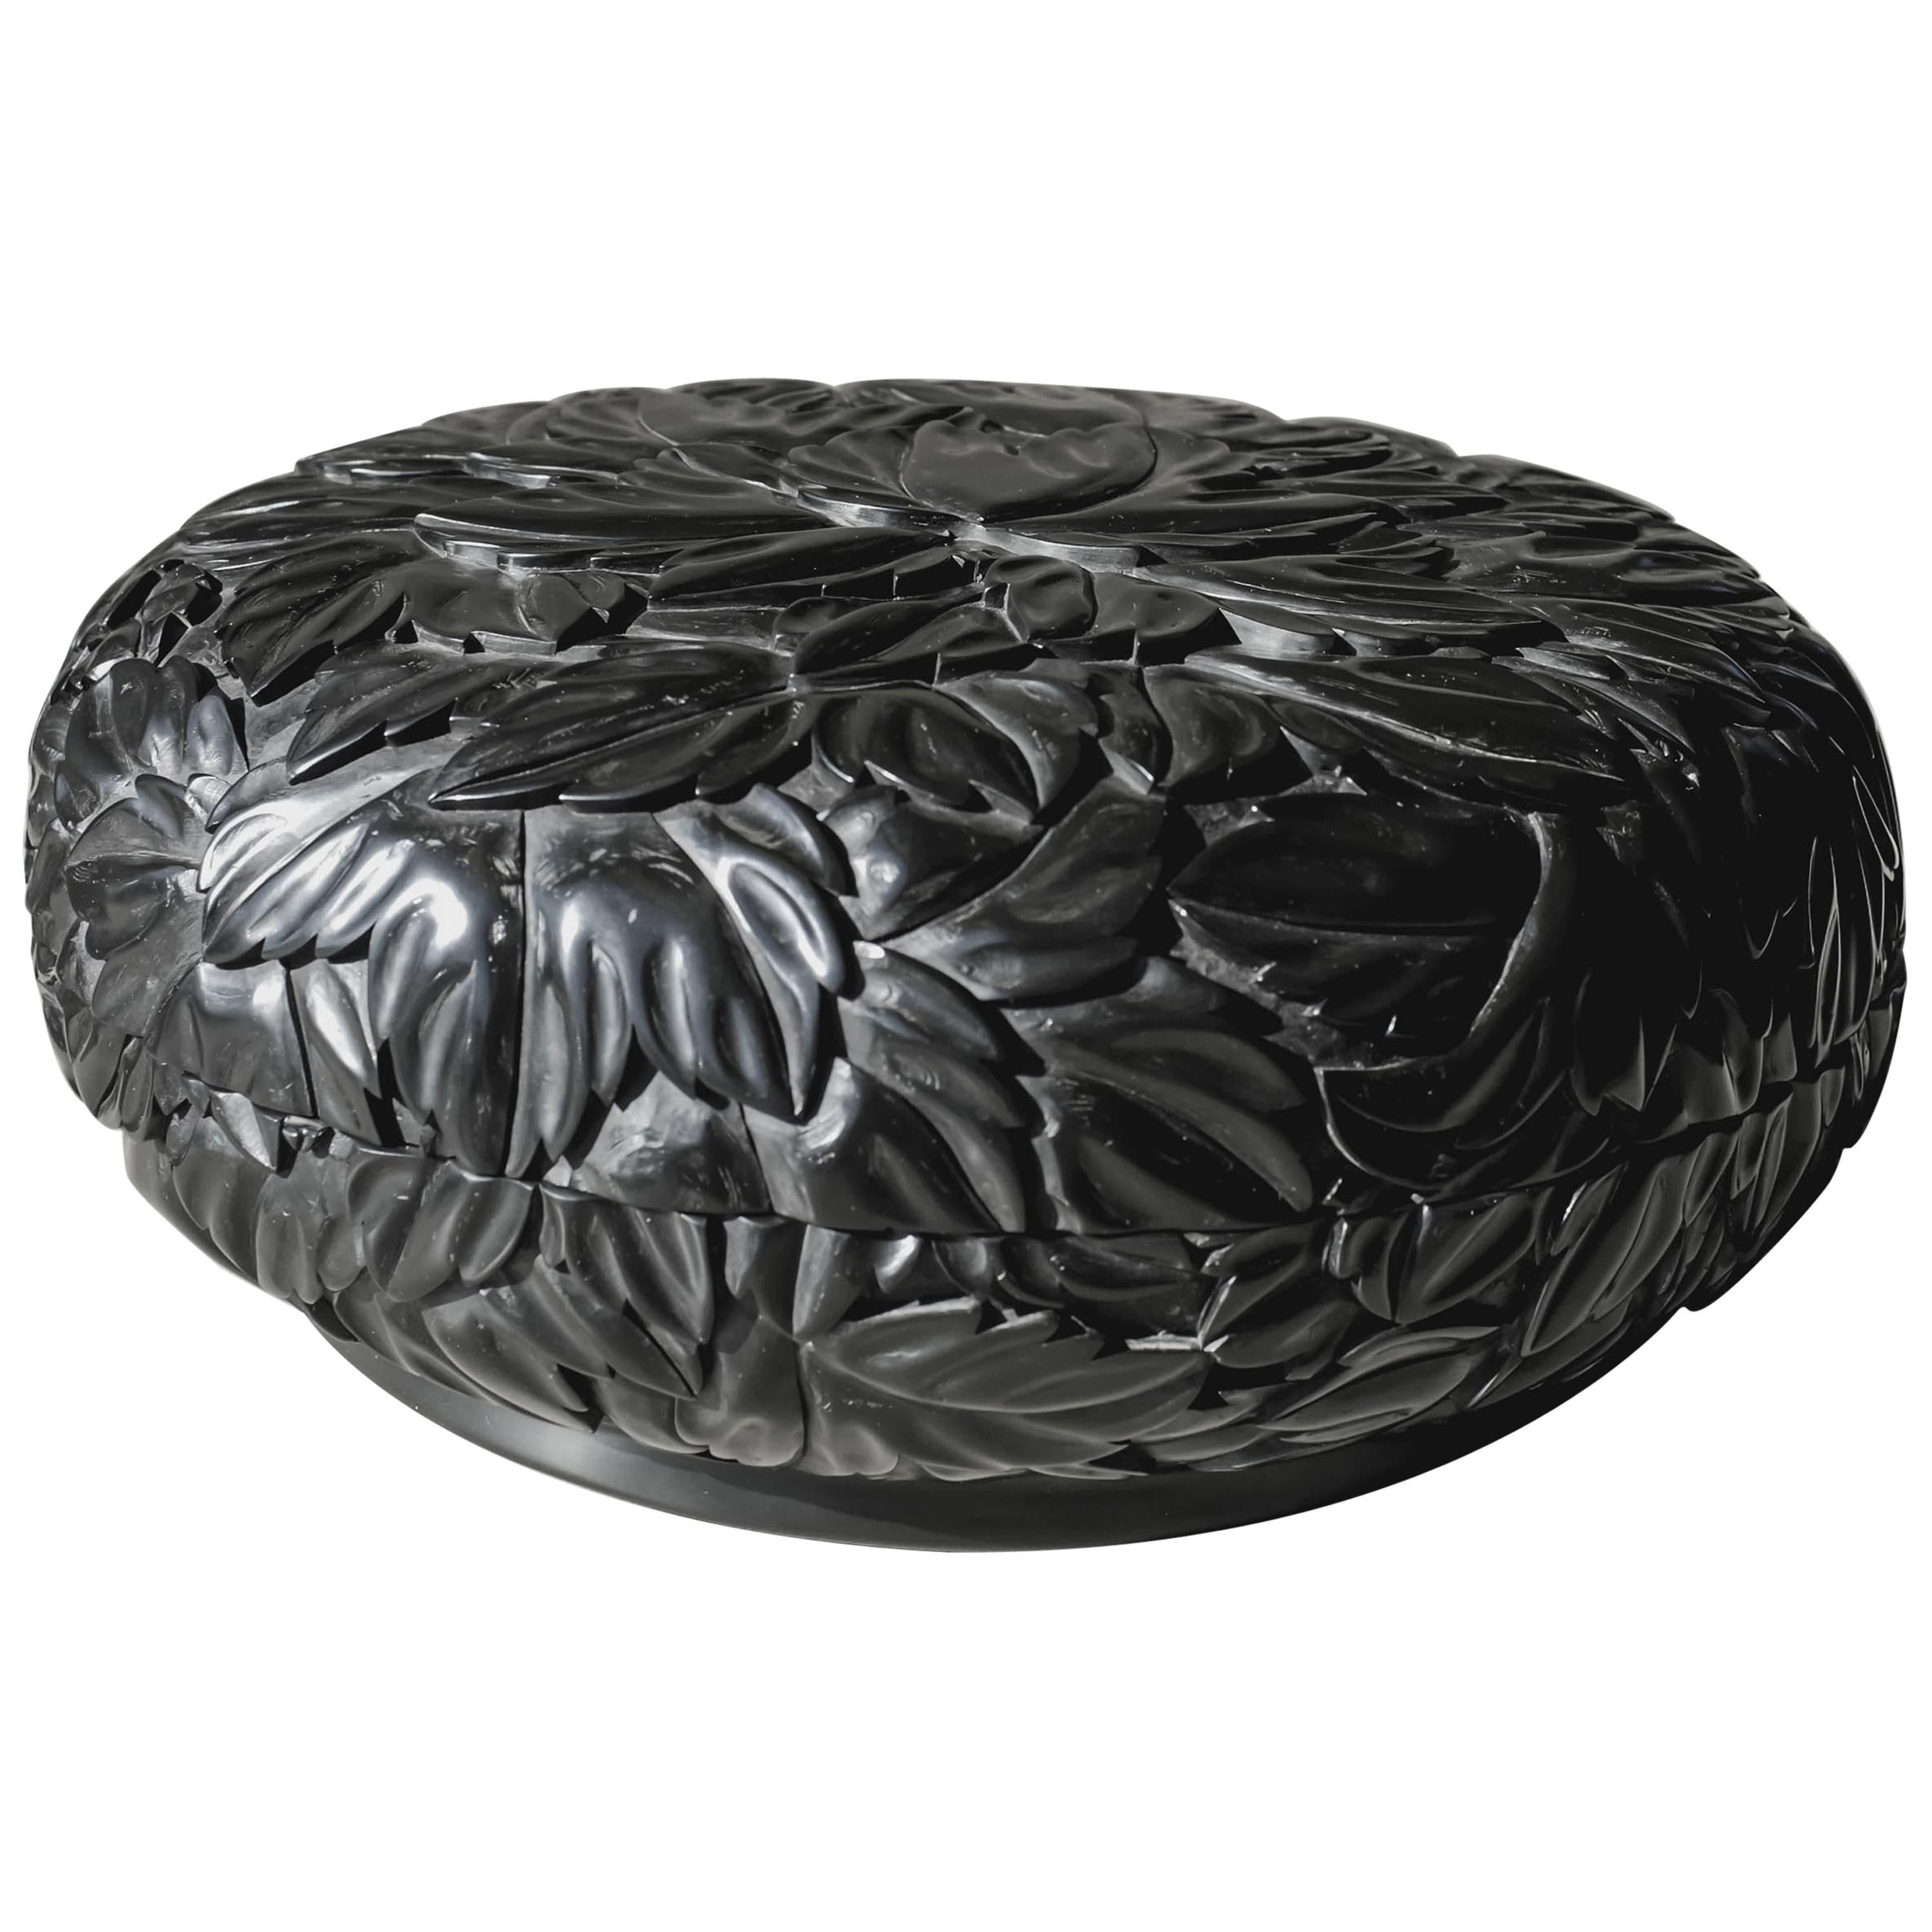 Round Leaf Design Box, Black Lacquer by Robert Kuo, Limited Edition, in Stock